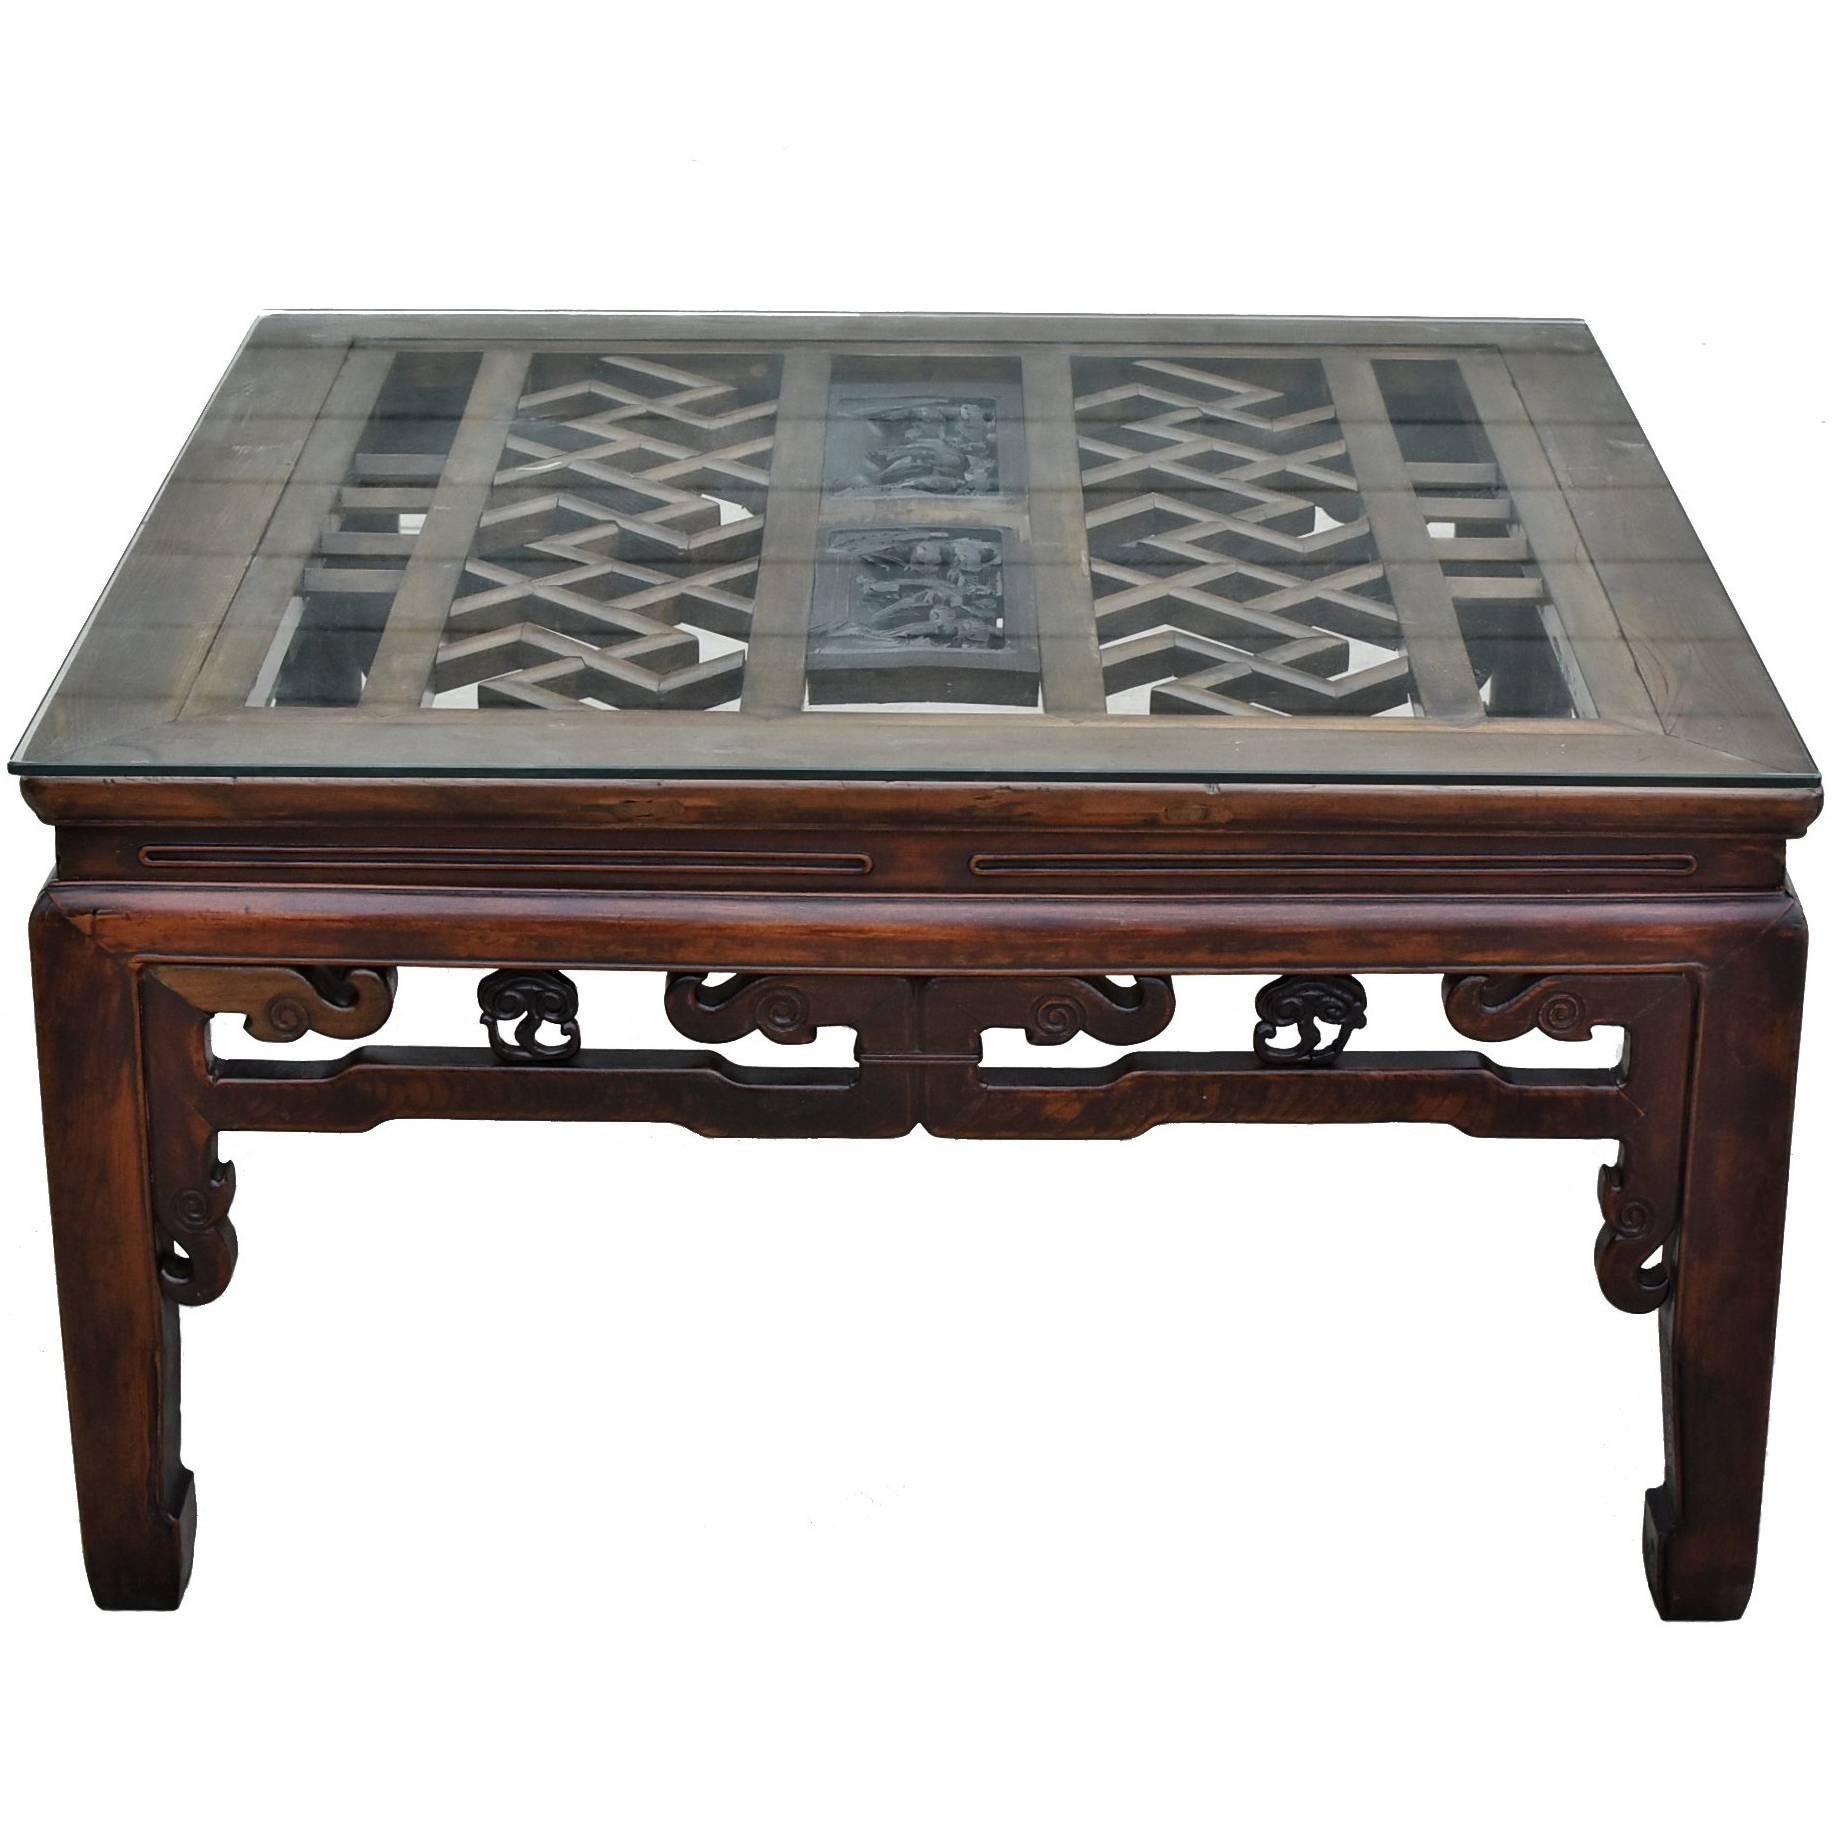 Square Asian Coffee Table with Antique Longevity Screen